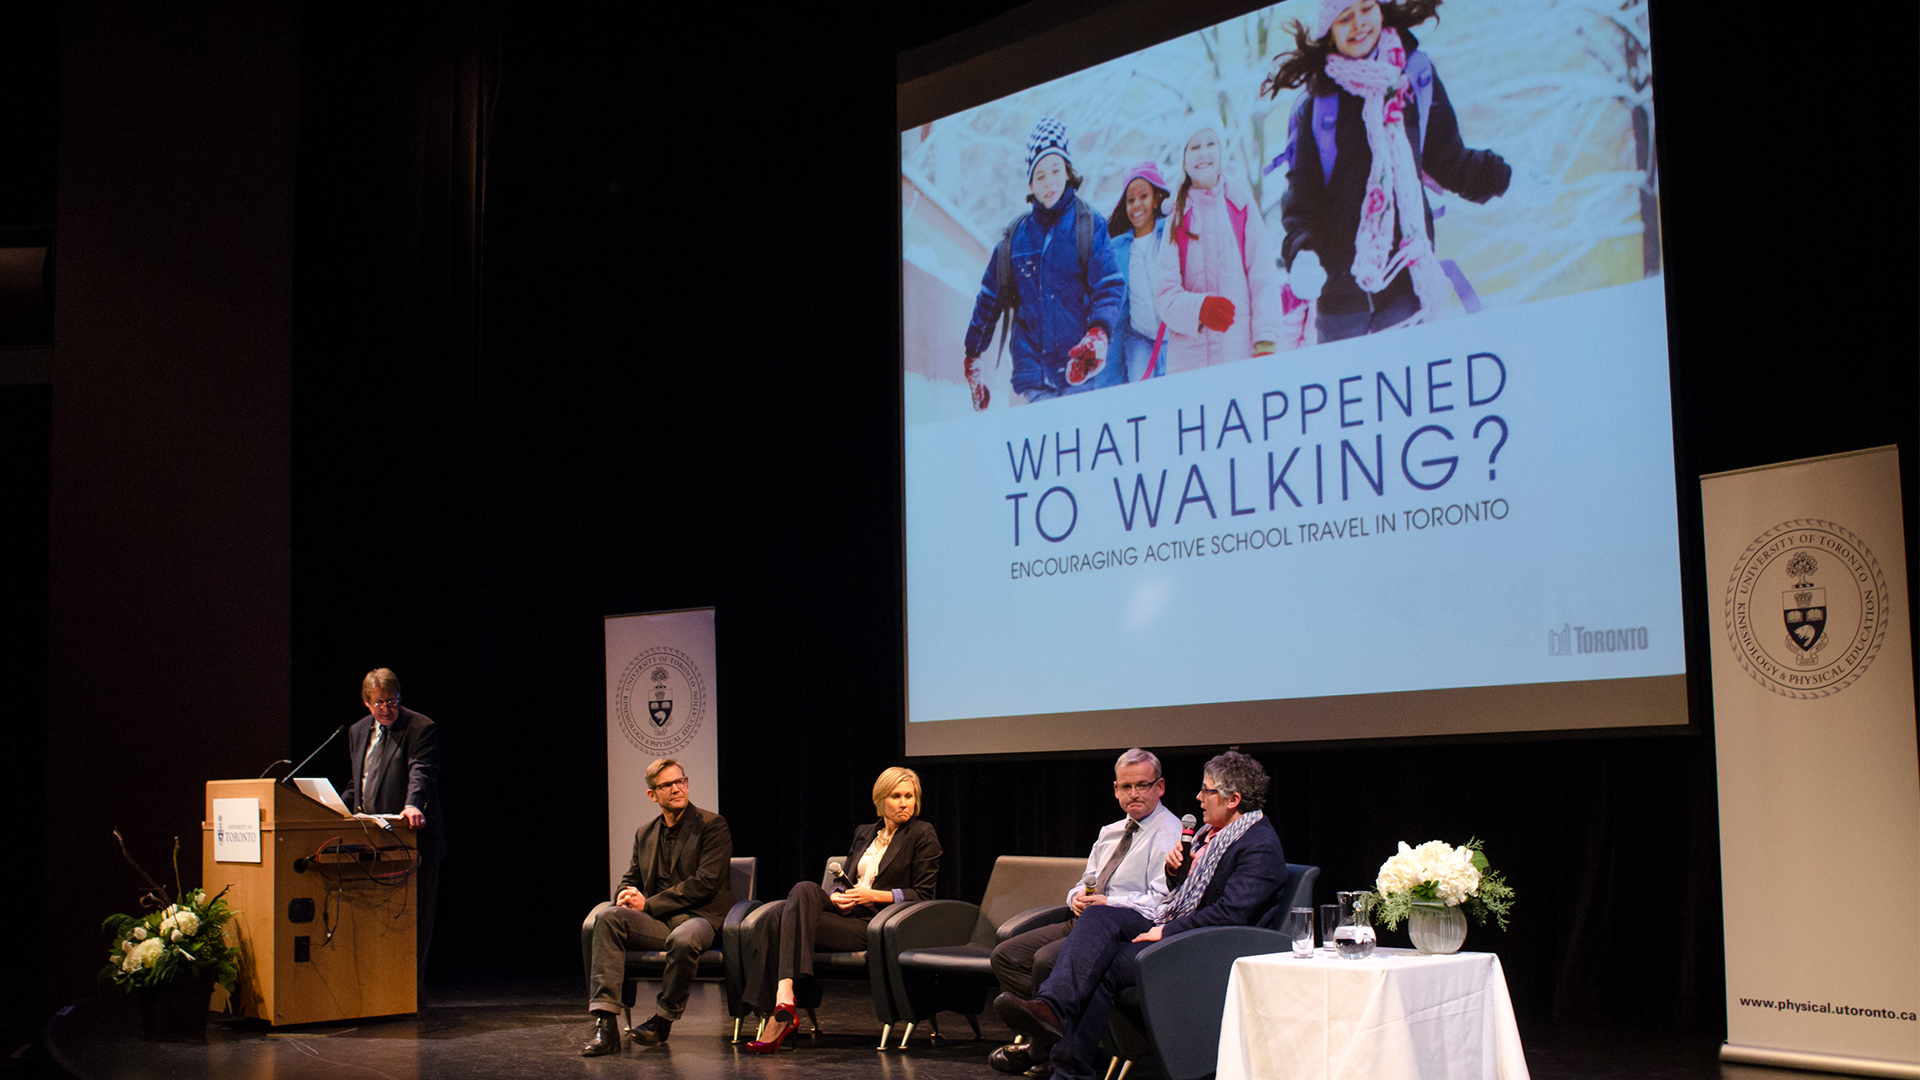 What happened to walking event panelists